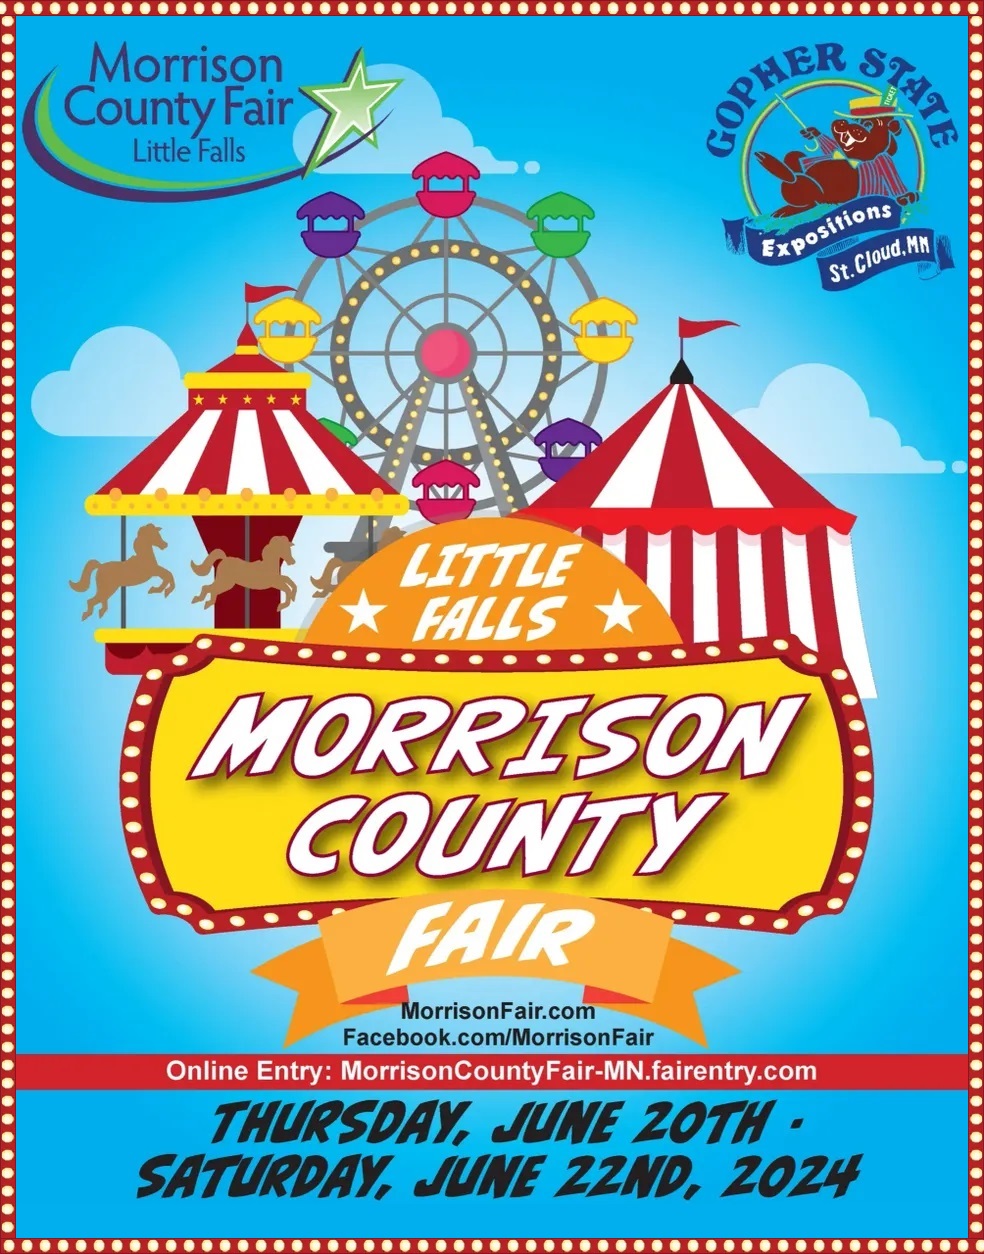 Get ready for some fun at the Morrison County Fair Photo